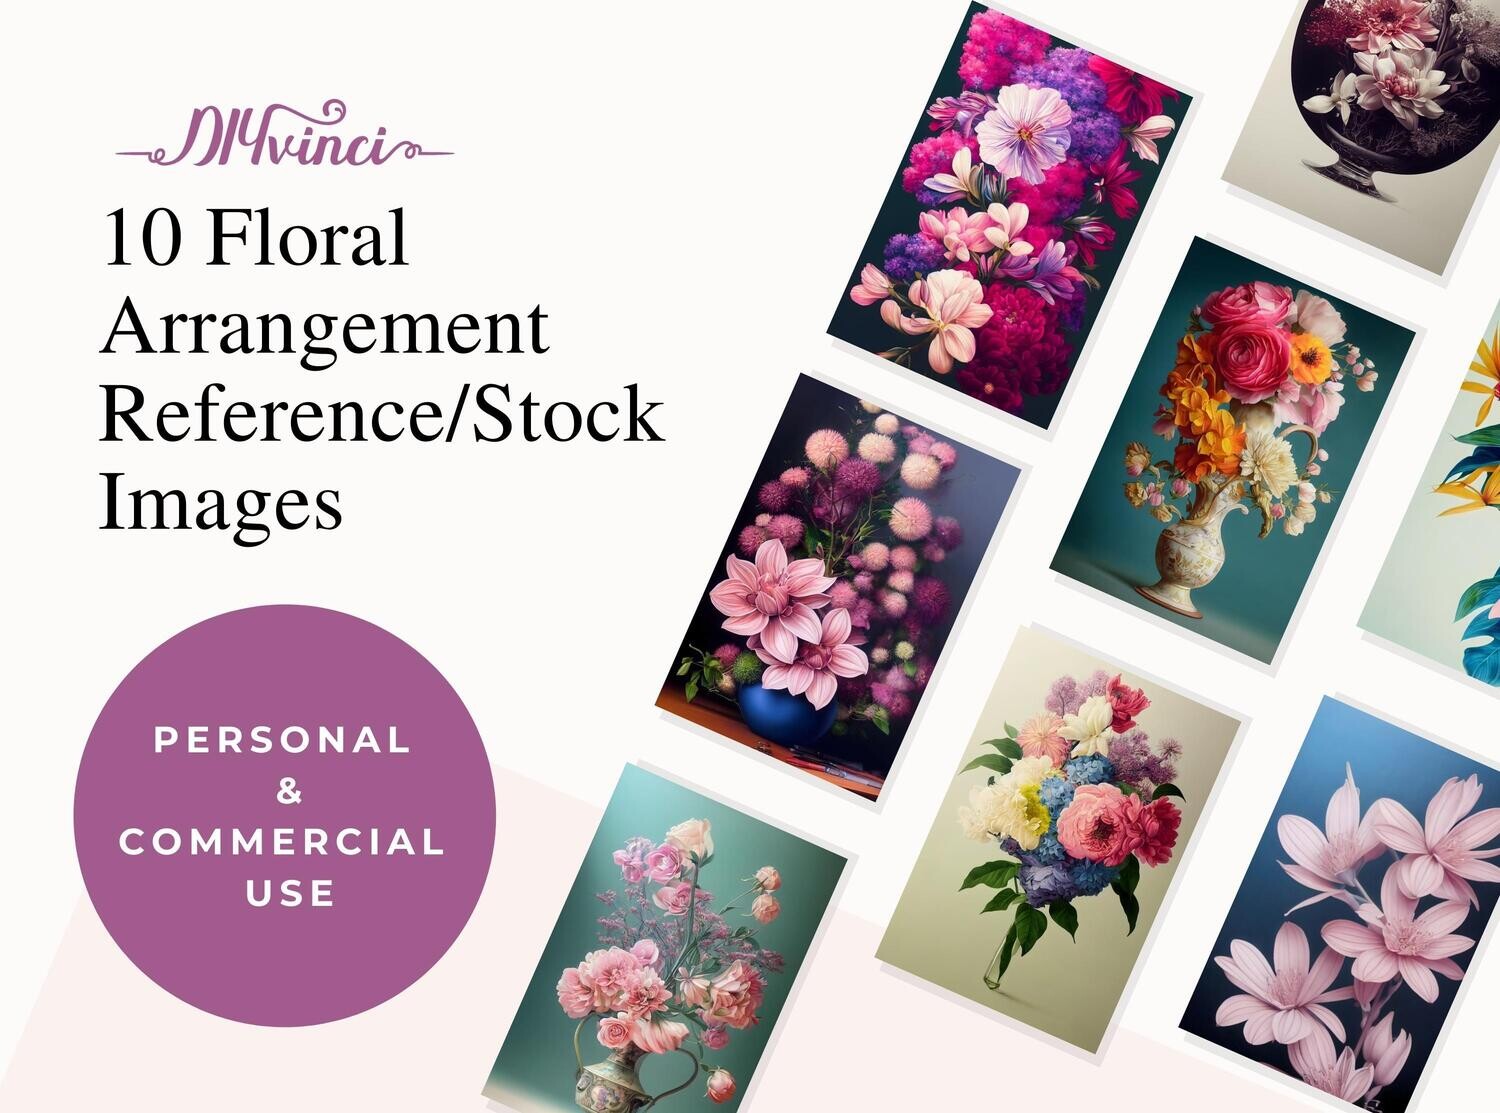 Floral Arrangement Reference and Stock Images - 10 JPEG - Personal & Commercial Use